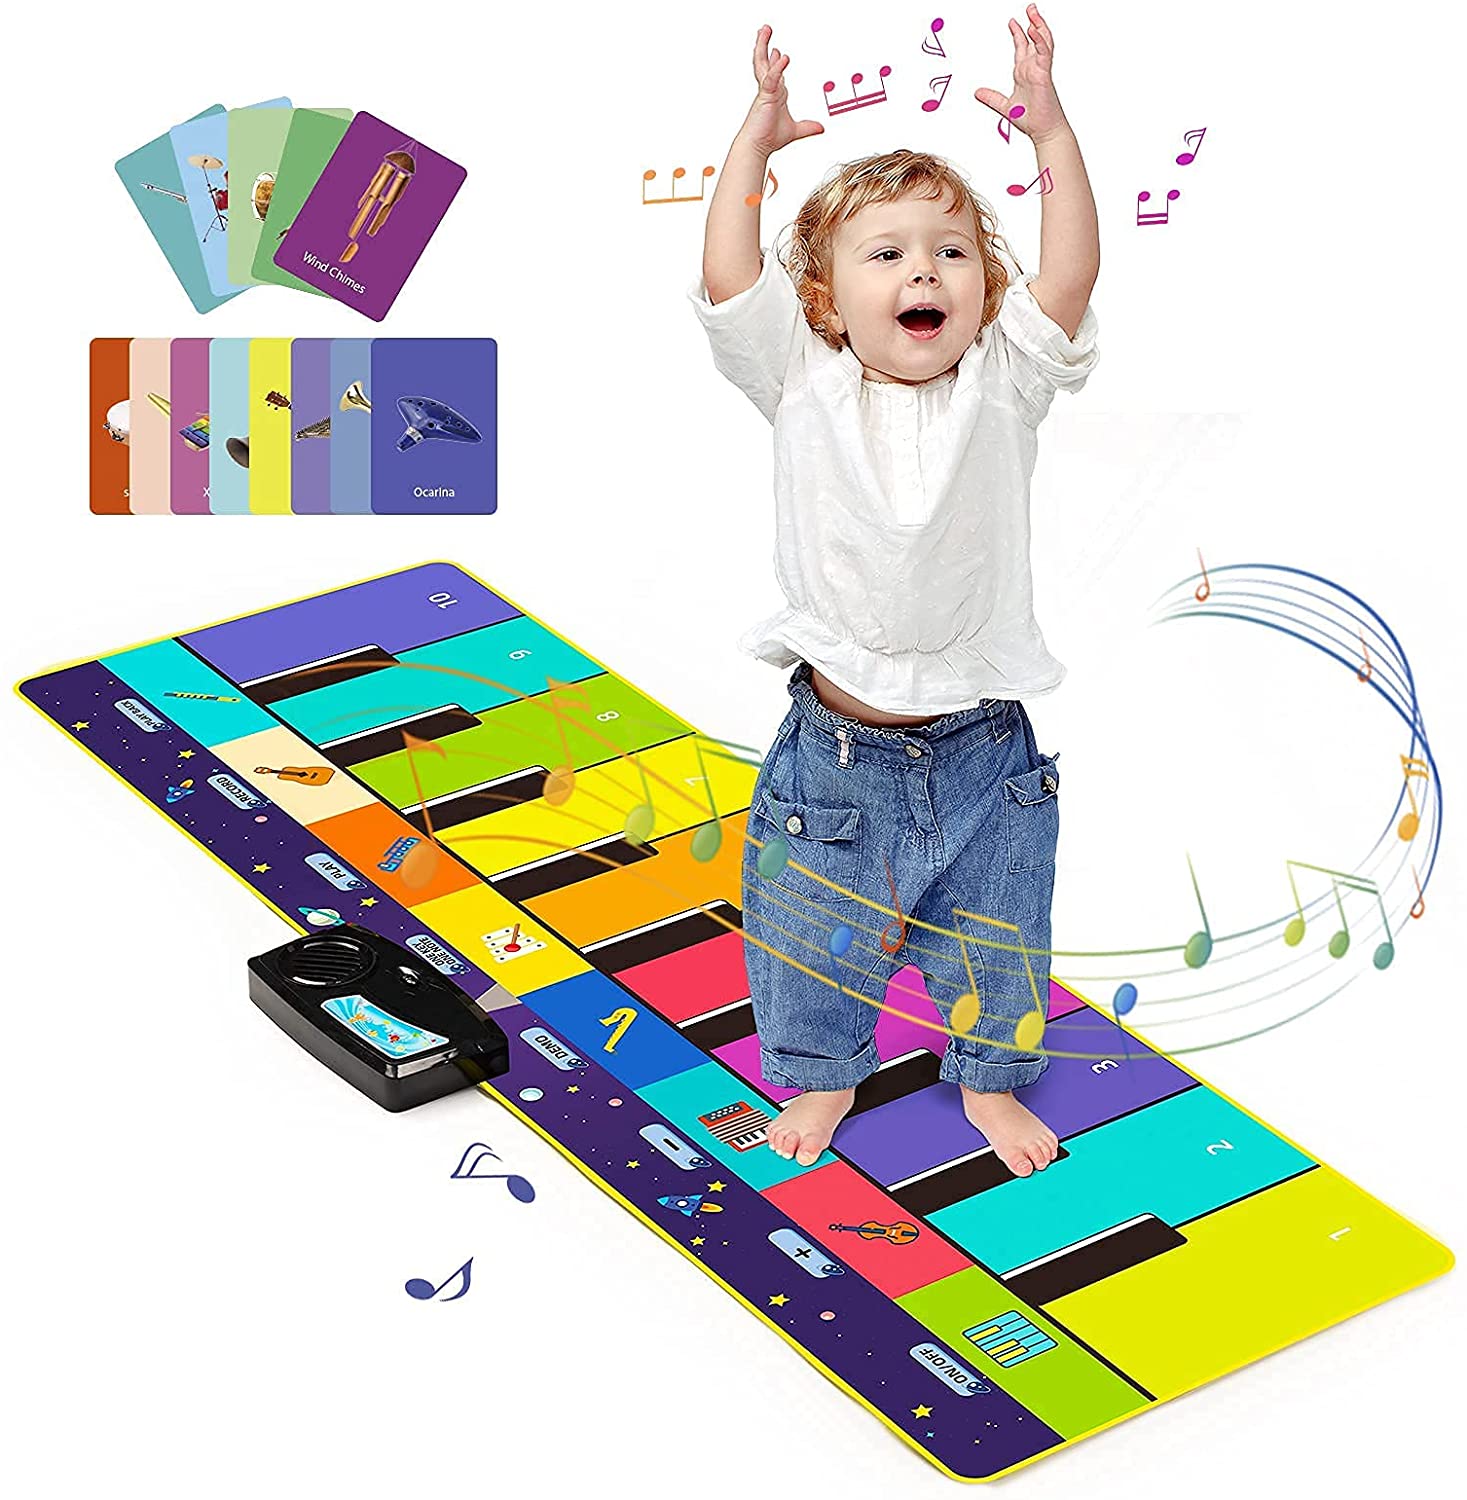 Piano-Musical Mat for Kids-50% OFF Today ONLY!